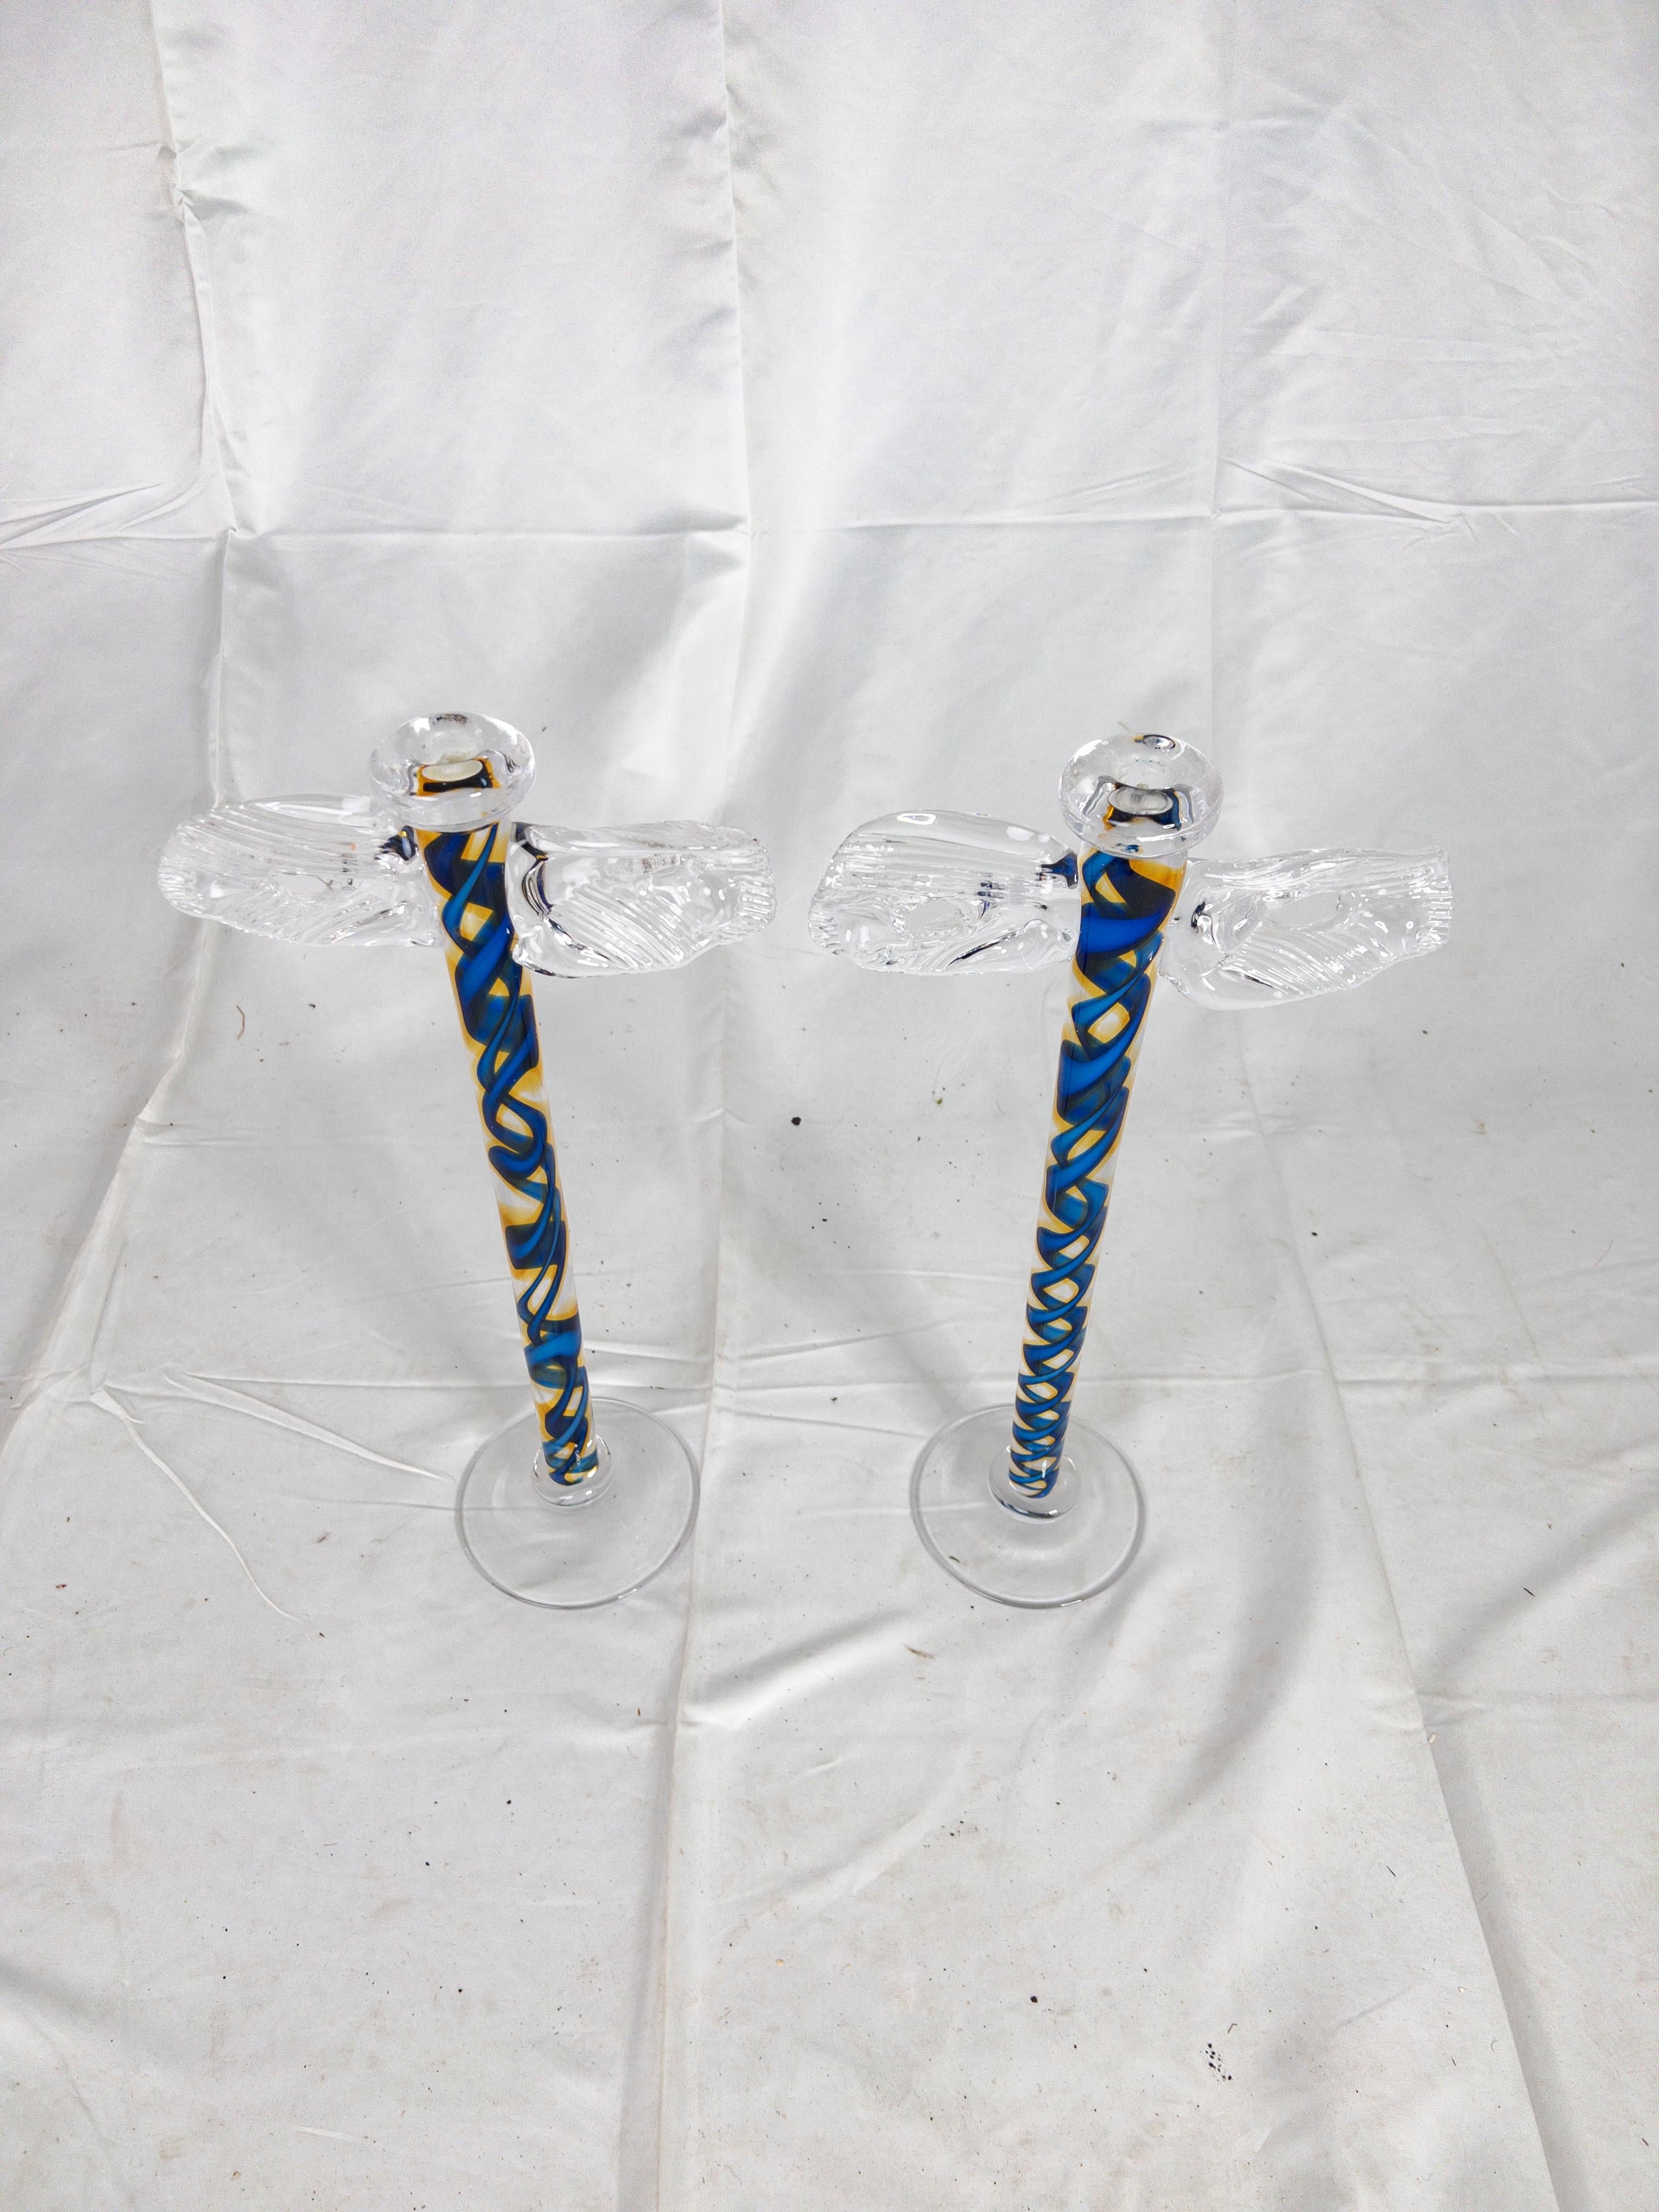 Winged Glass Candle Sticks. Amazing hand made with a pair of twisting black edged blue ribbons spiraling up the shafts and a 5 inch base.